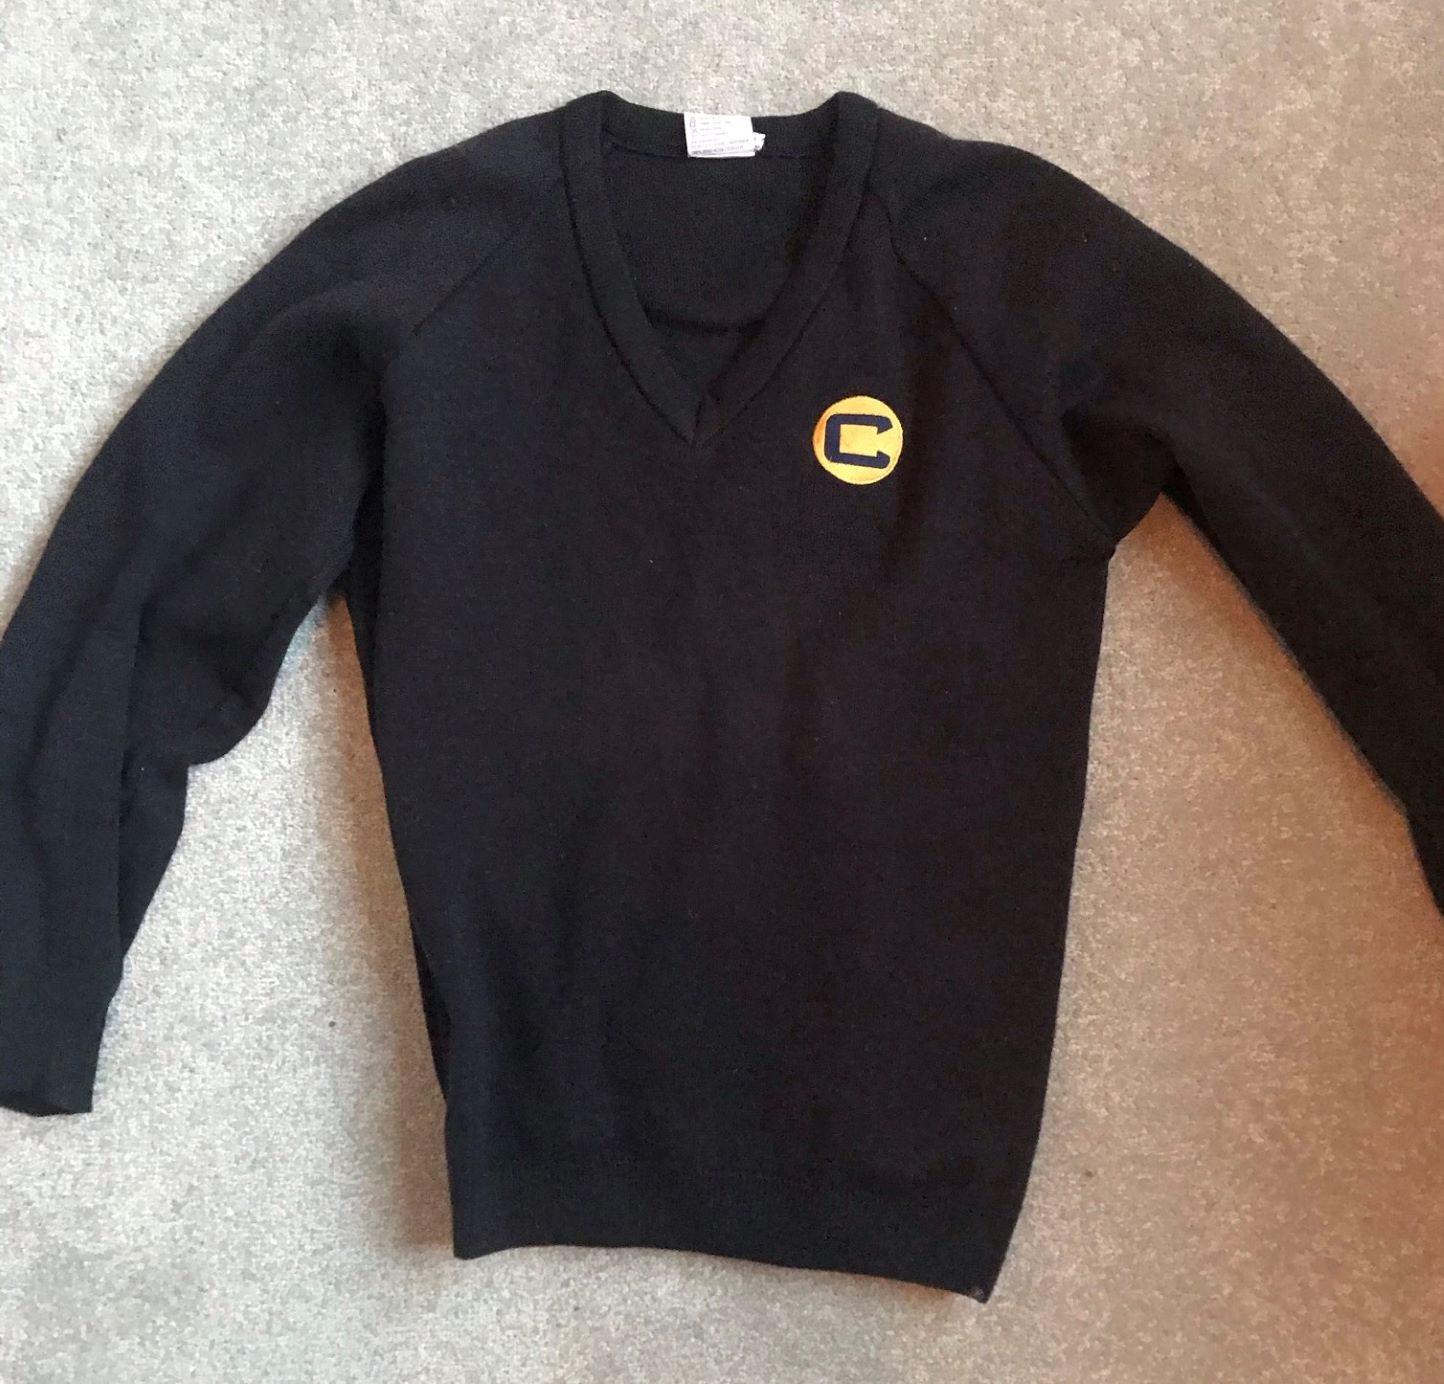 Charter North Jumper: Size 34 Emergency jumper (not great condition but stops you getting detention)